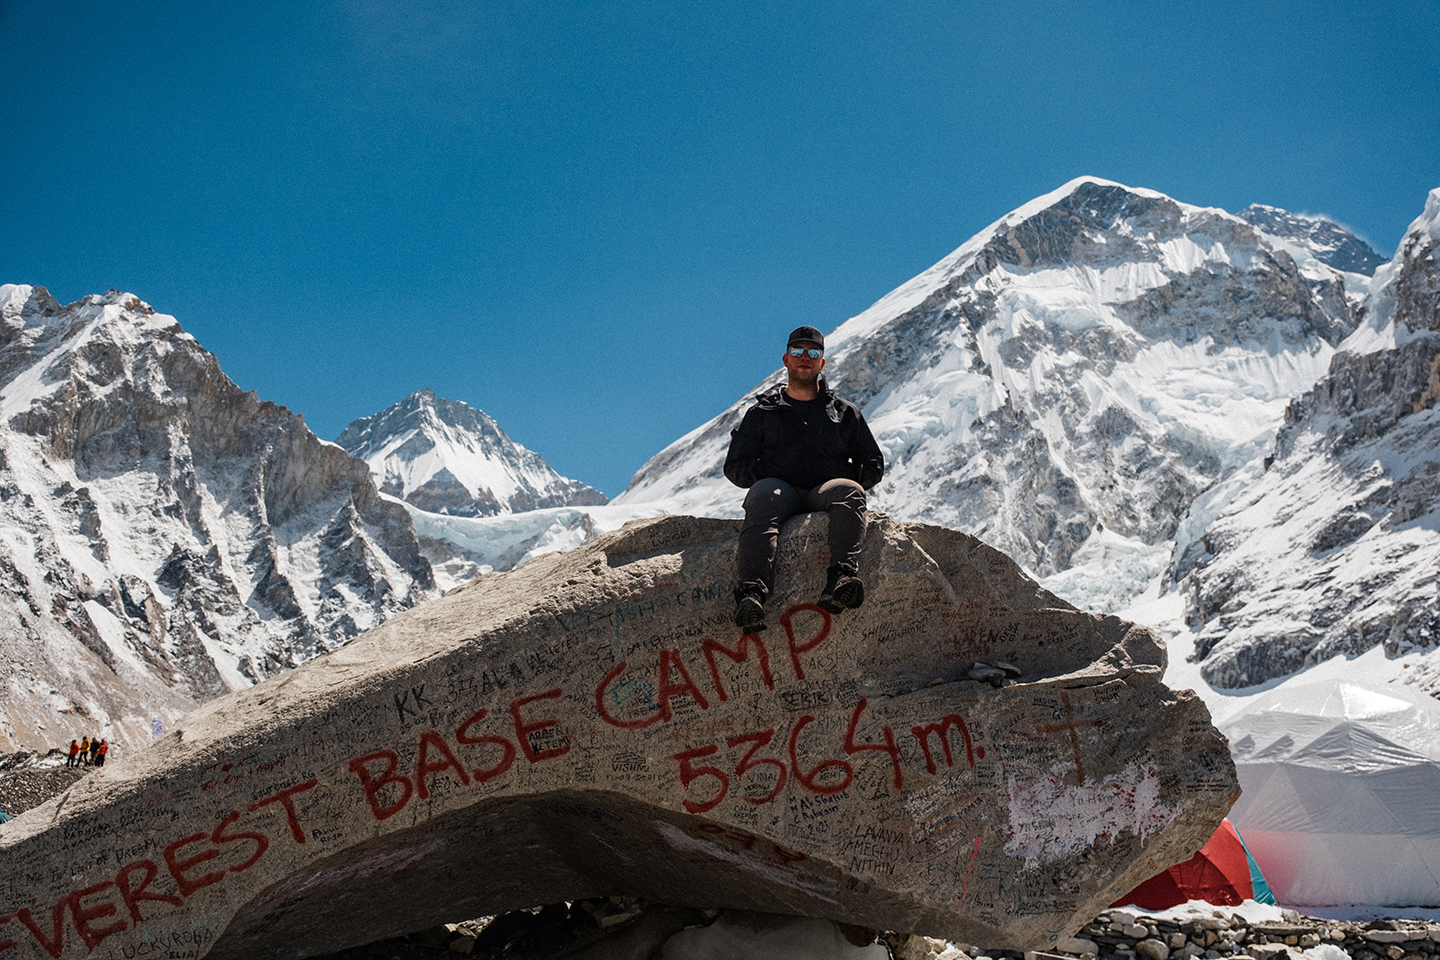 A trekker sits on the famous 'Trekkers Rock' which marks the entrance to Everest Base Camp, the West Shoulder of Mount Everest standing tall in the background.